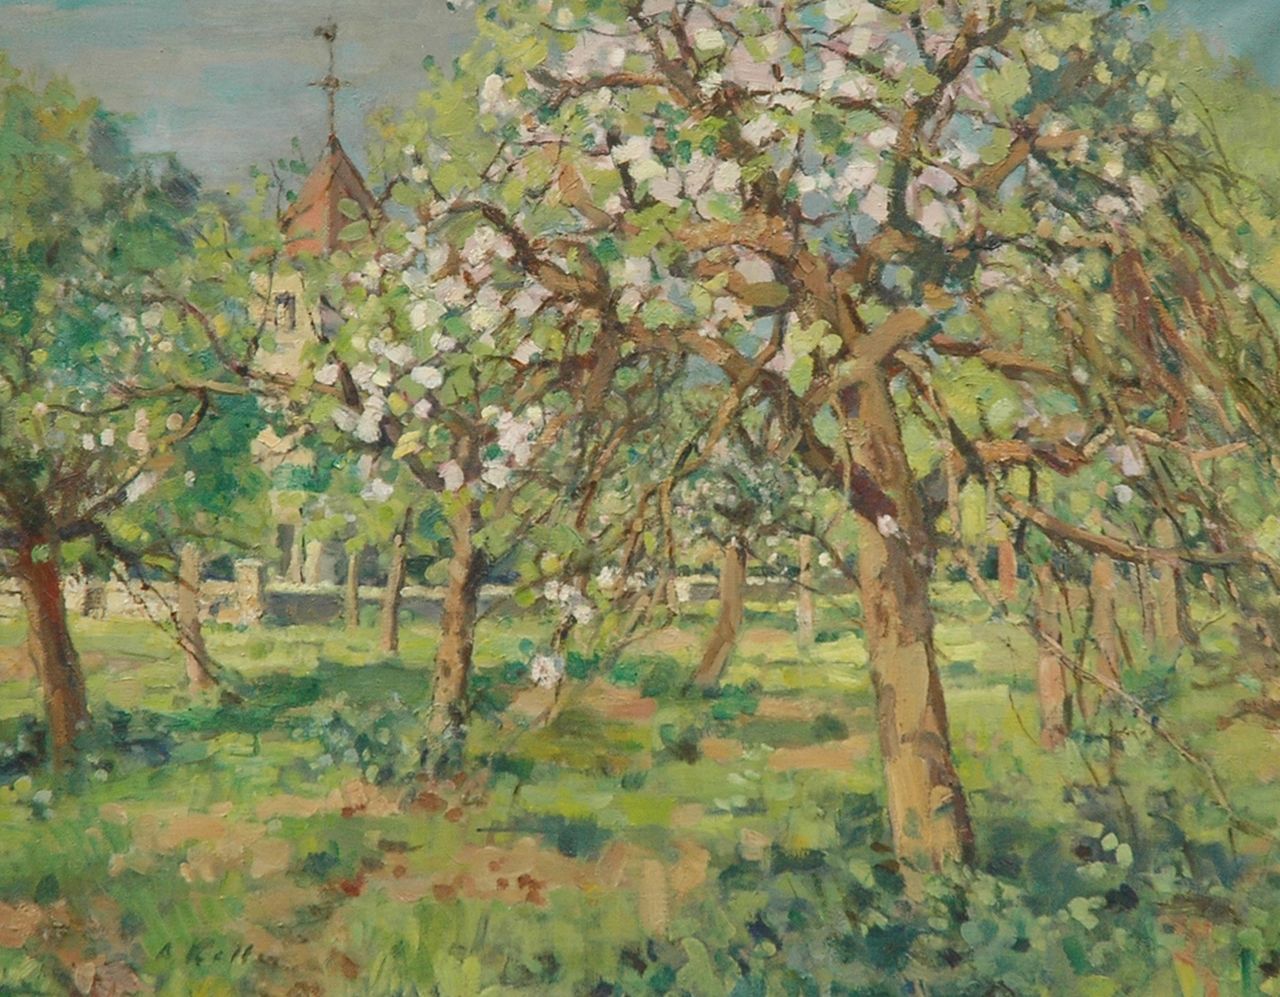 Keller A.  | Adolphe Keller, Orchard in bloom, Öl auf Leinwand 73,4 x 92,3 cm, signed l.l. und dated 1954 on the stretcher